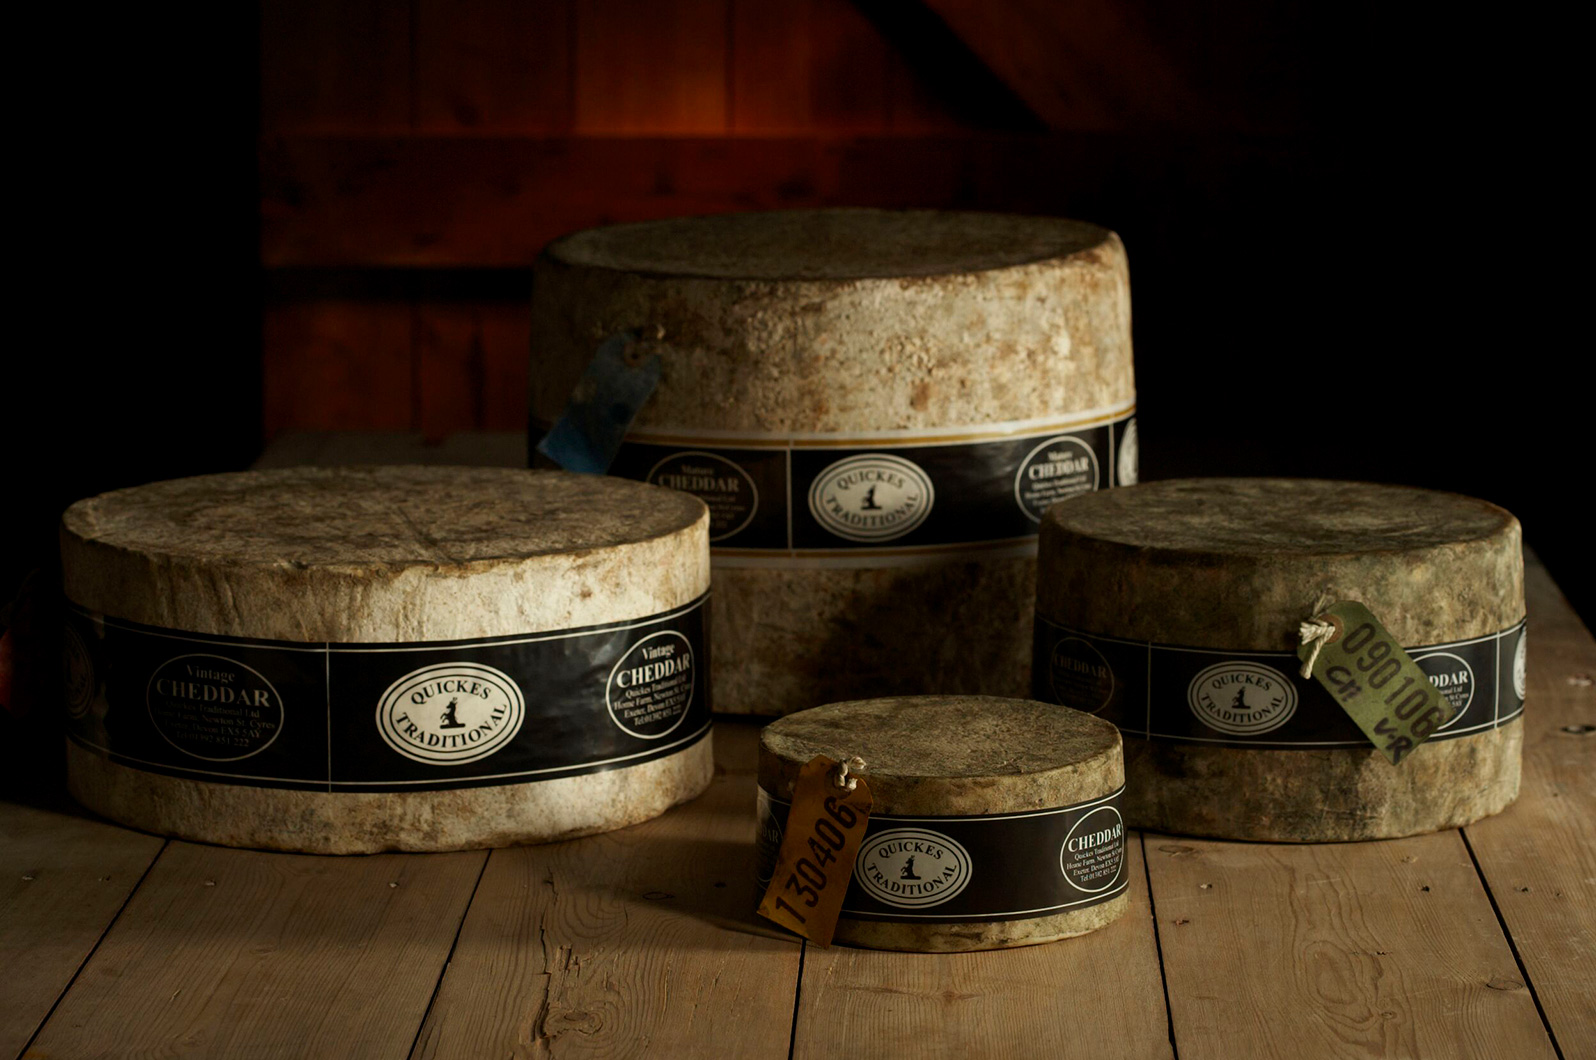 This studio shot is lit to convey the aged and crafted character of the cheese.